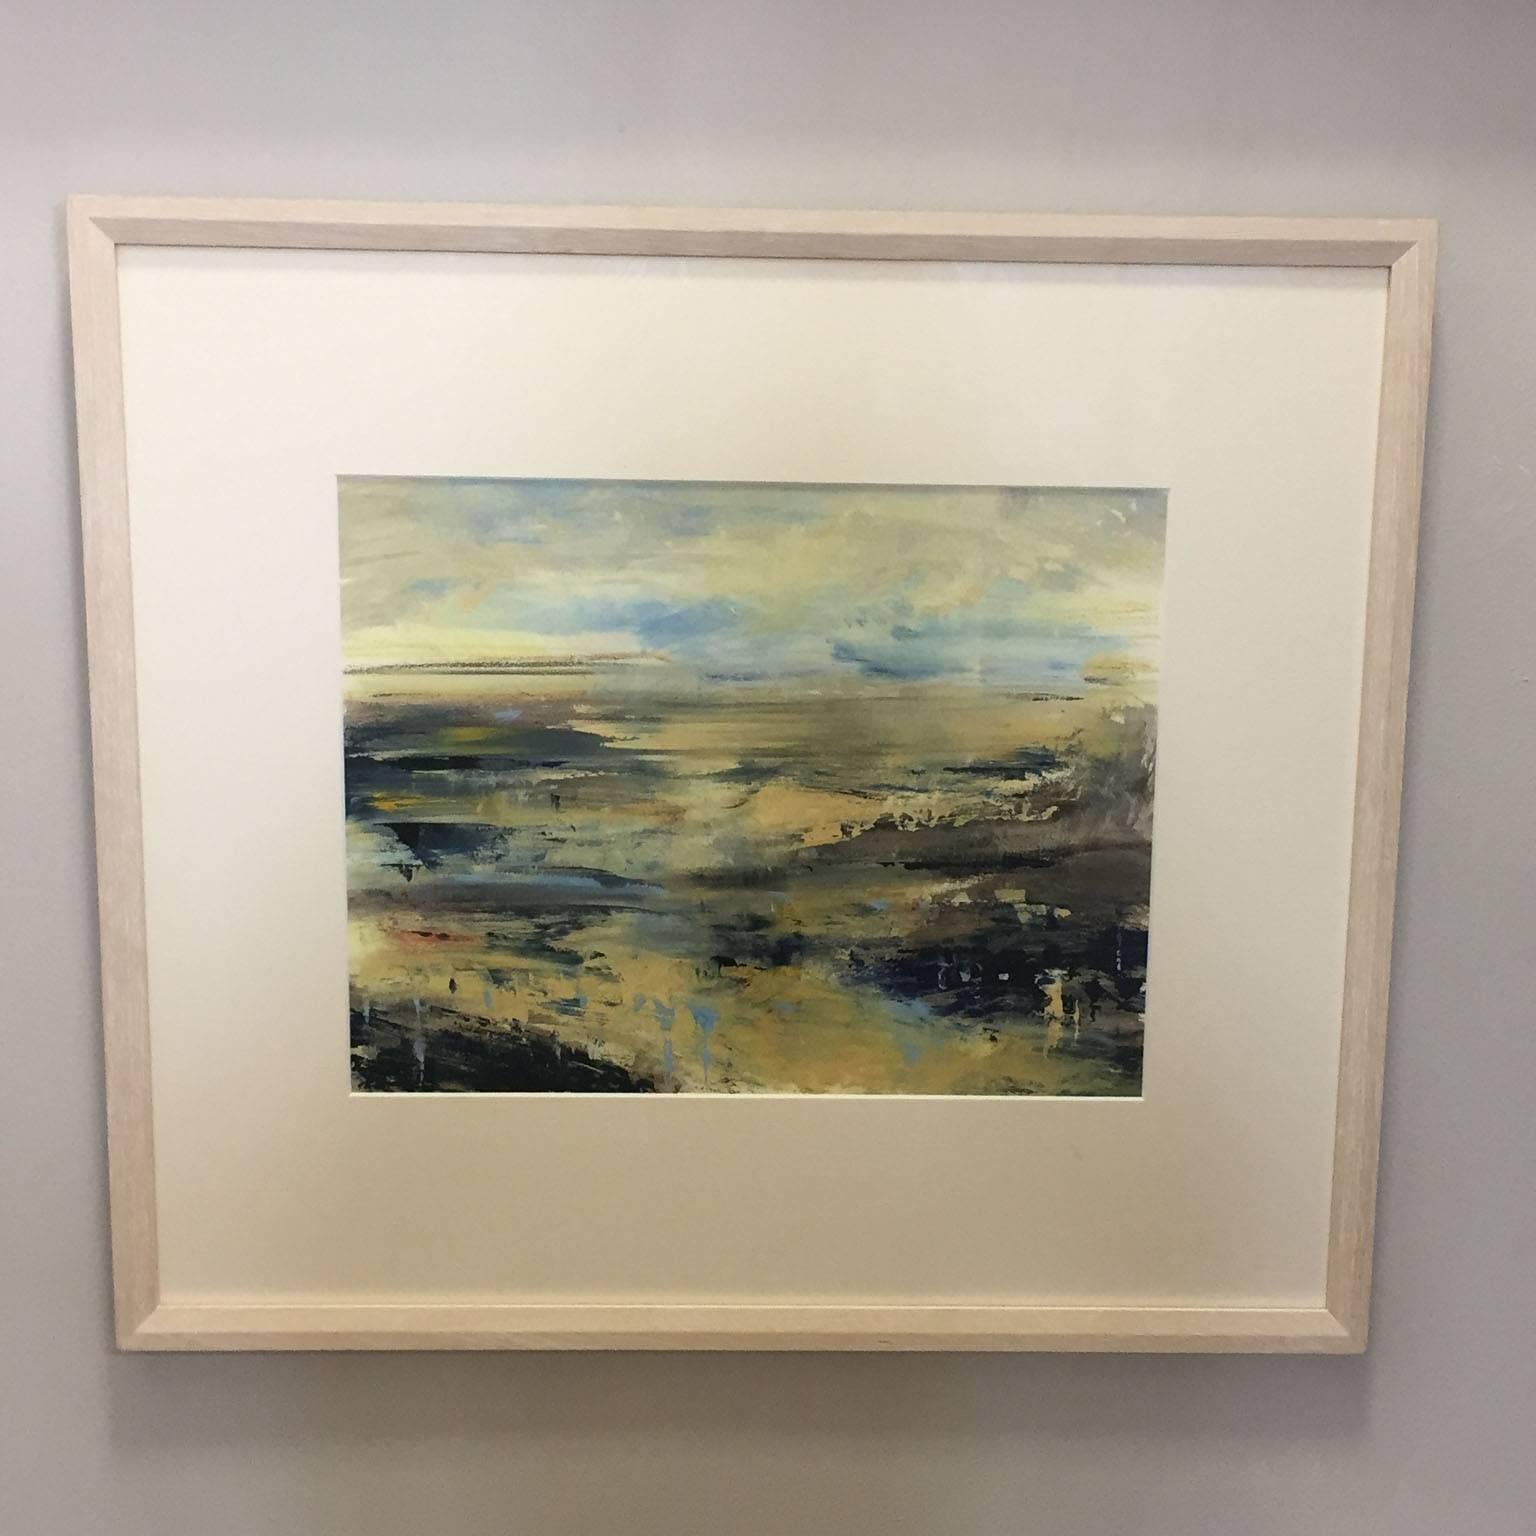 James Tatum's beautiful abstract landscape painting is of the 'River Exe Estuary.' The Exe Estuary is approximately 8 miles long, starting on the River Exe, south of Exeter, and spreading down towards the English Channel and the town of Exmouth,